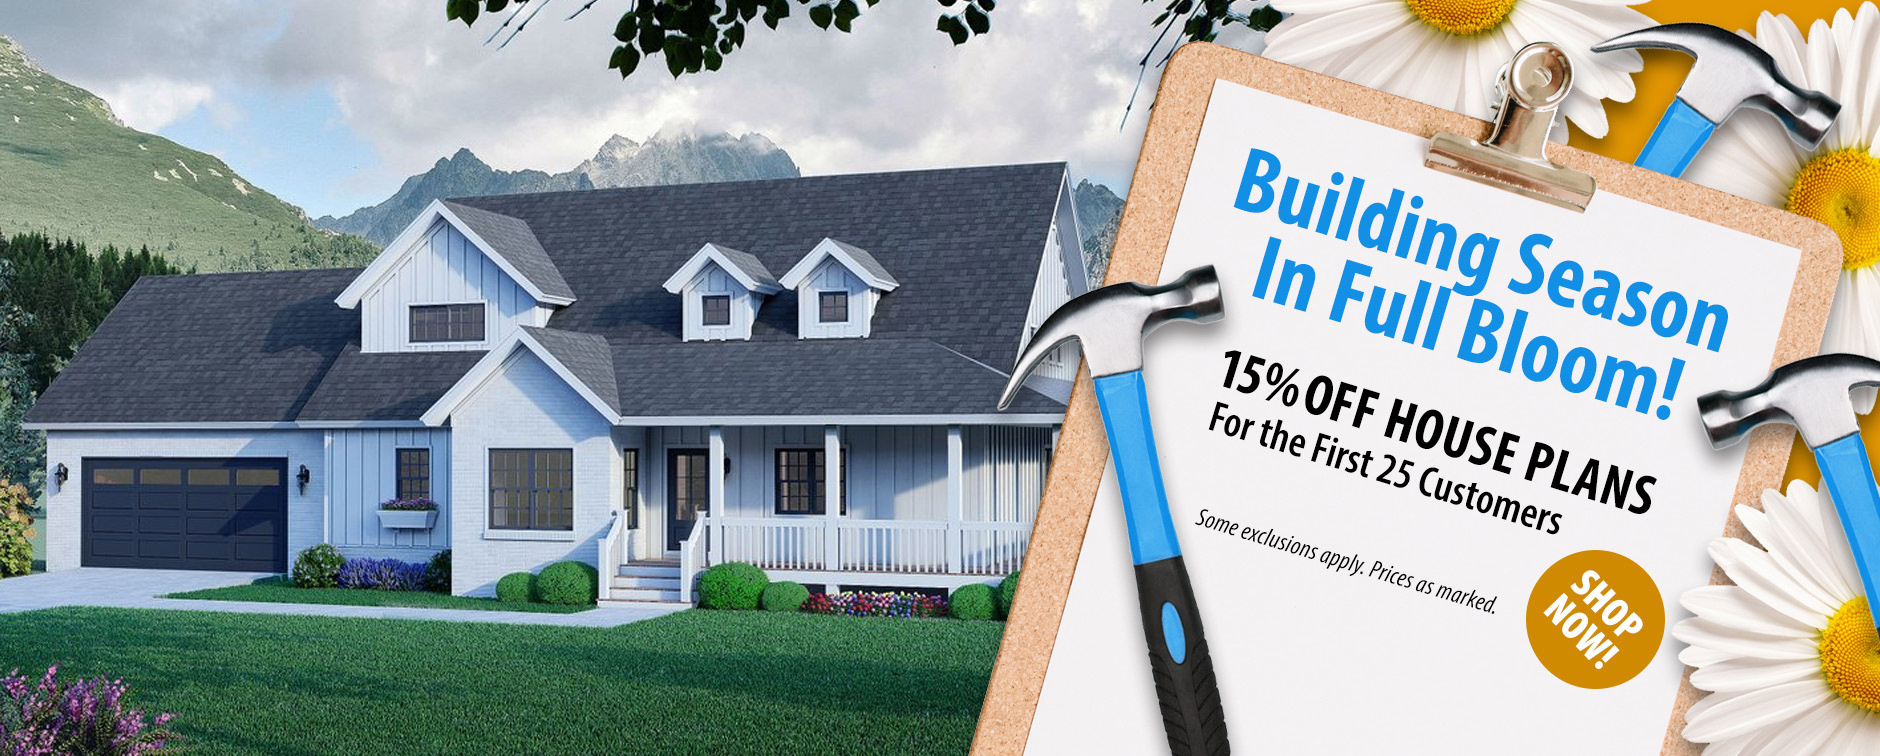 Get 15% Off Dream House Plans - Farmhouse, Modern, More - First 25 Customers